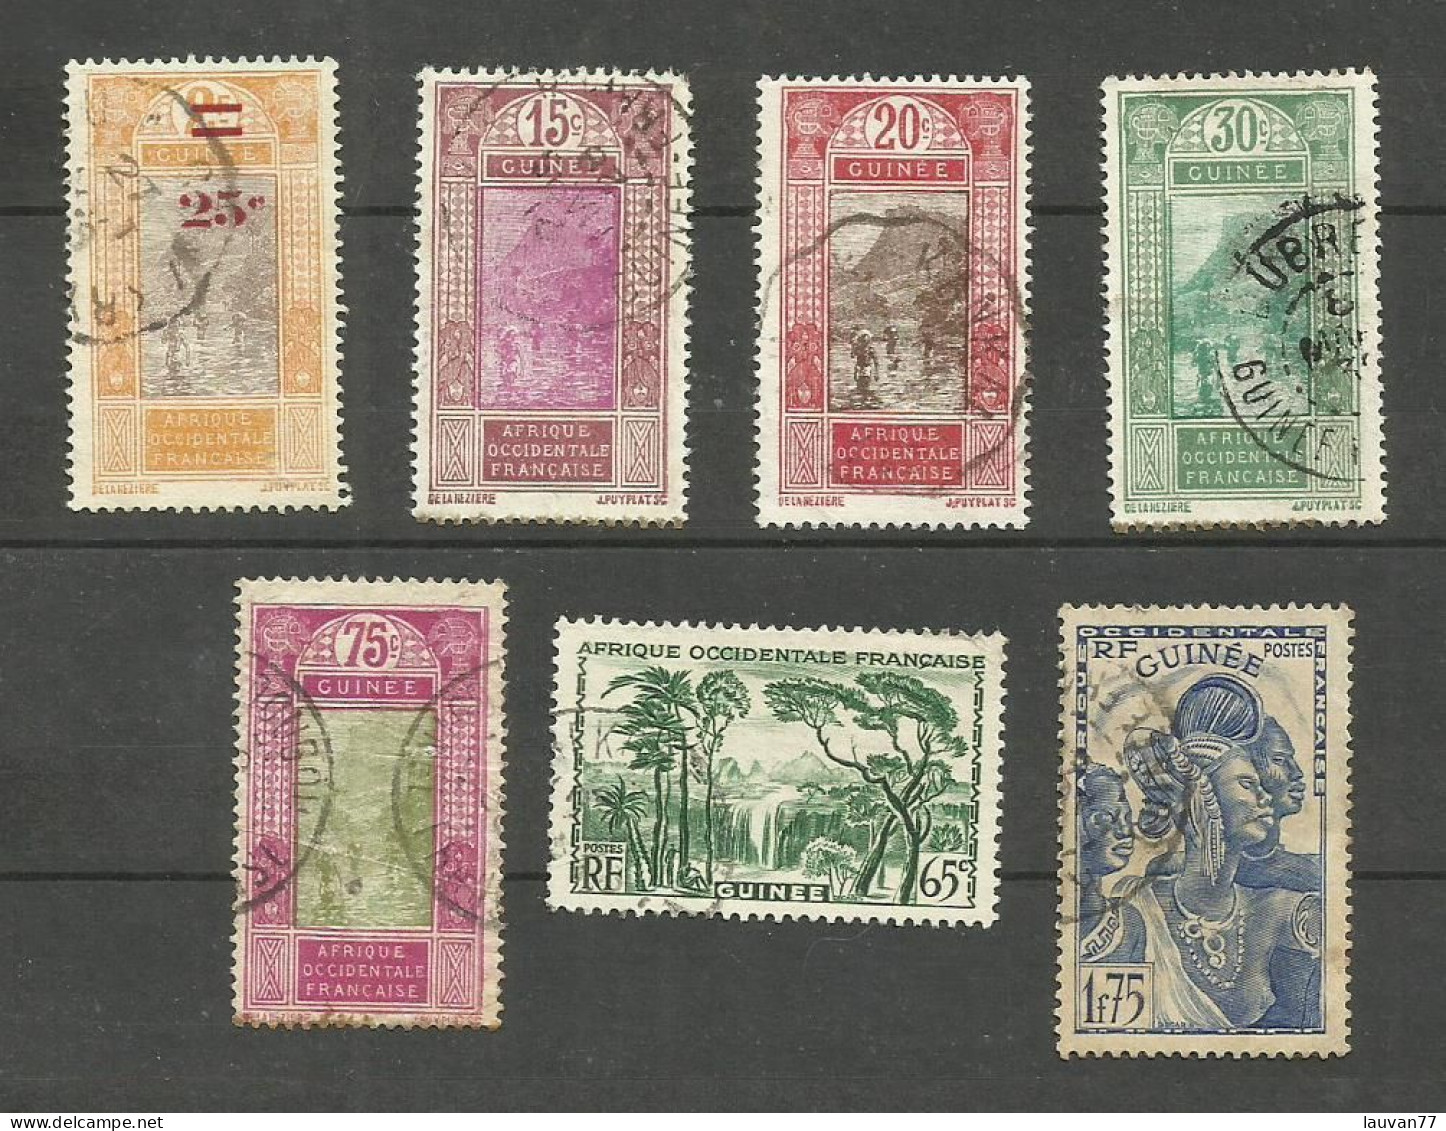 GUINEE N°99, 107 à 110, 137, 141 Cote 5.20€ - Used Stamps